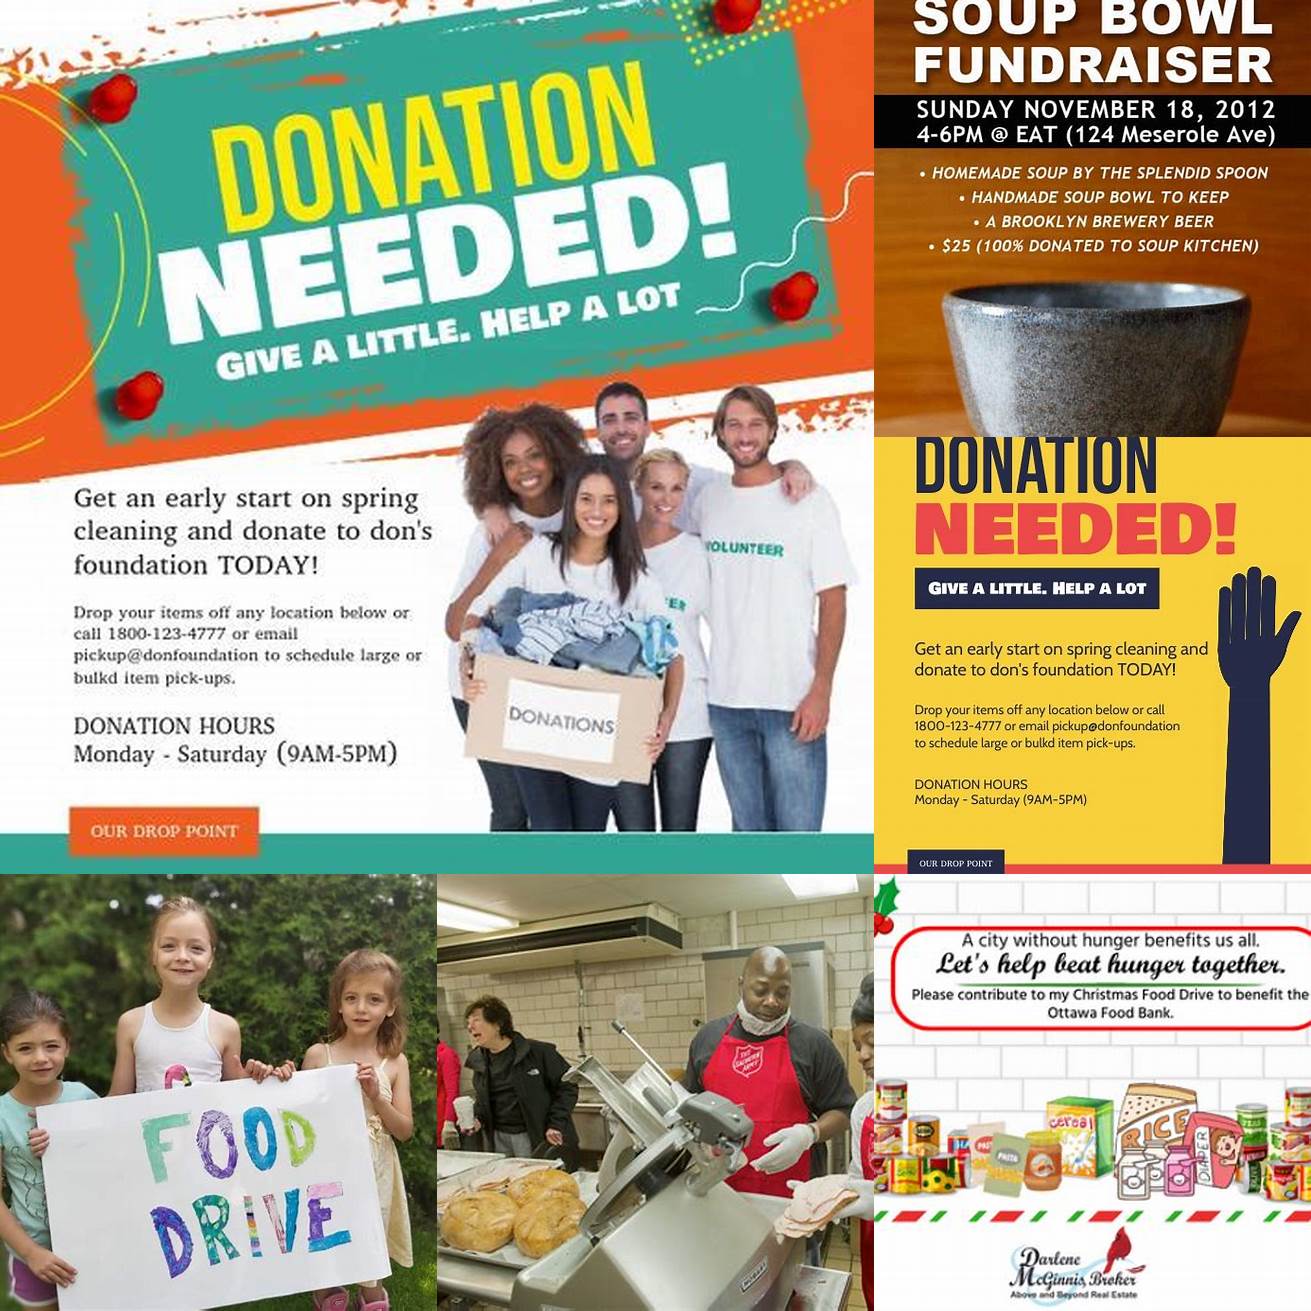 Attend events Attend fundraising events food drives and other events hosted by soup kitchens to show your support